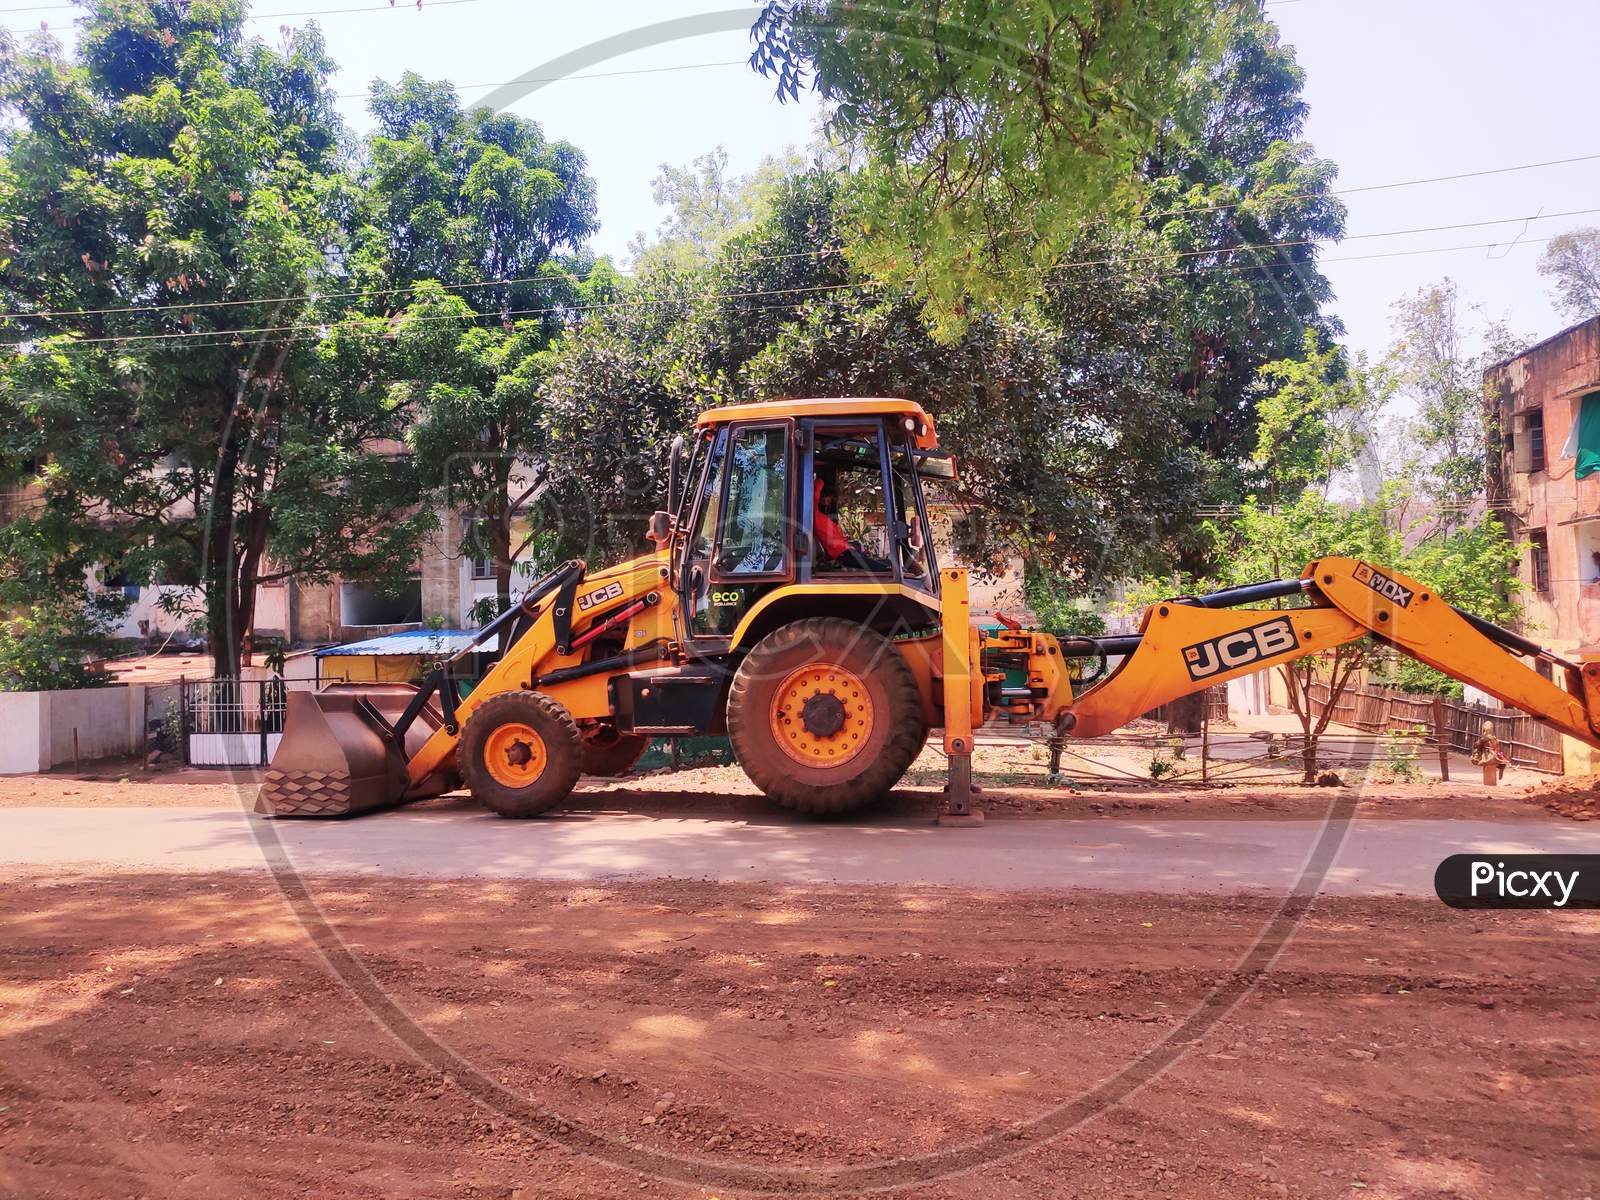 JCB machine used in industrial area